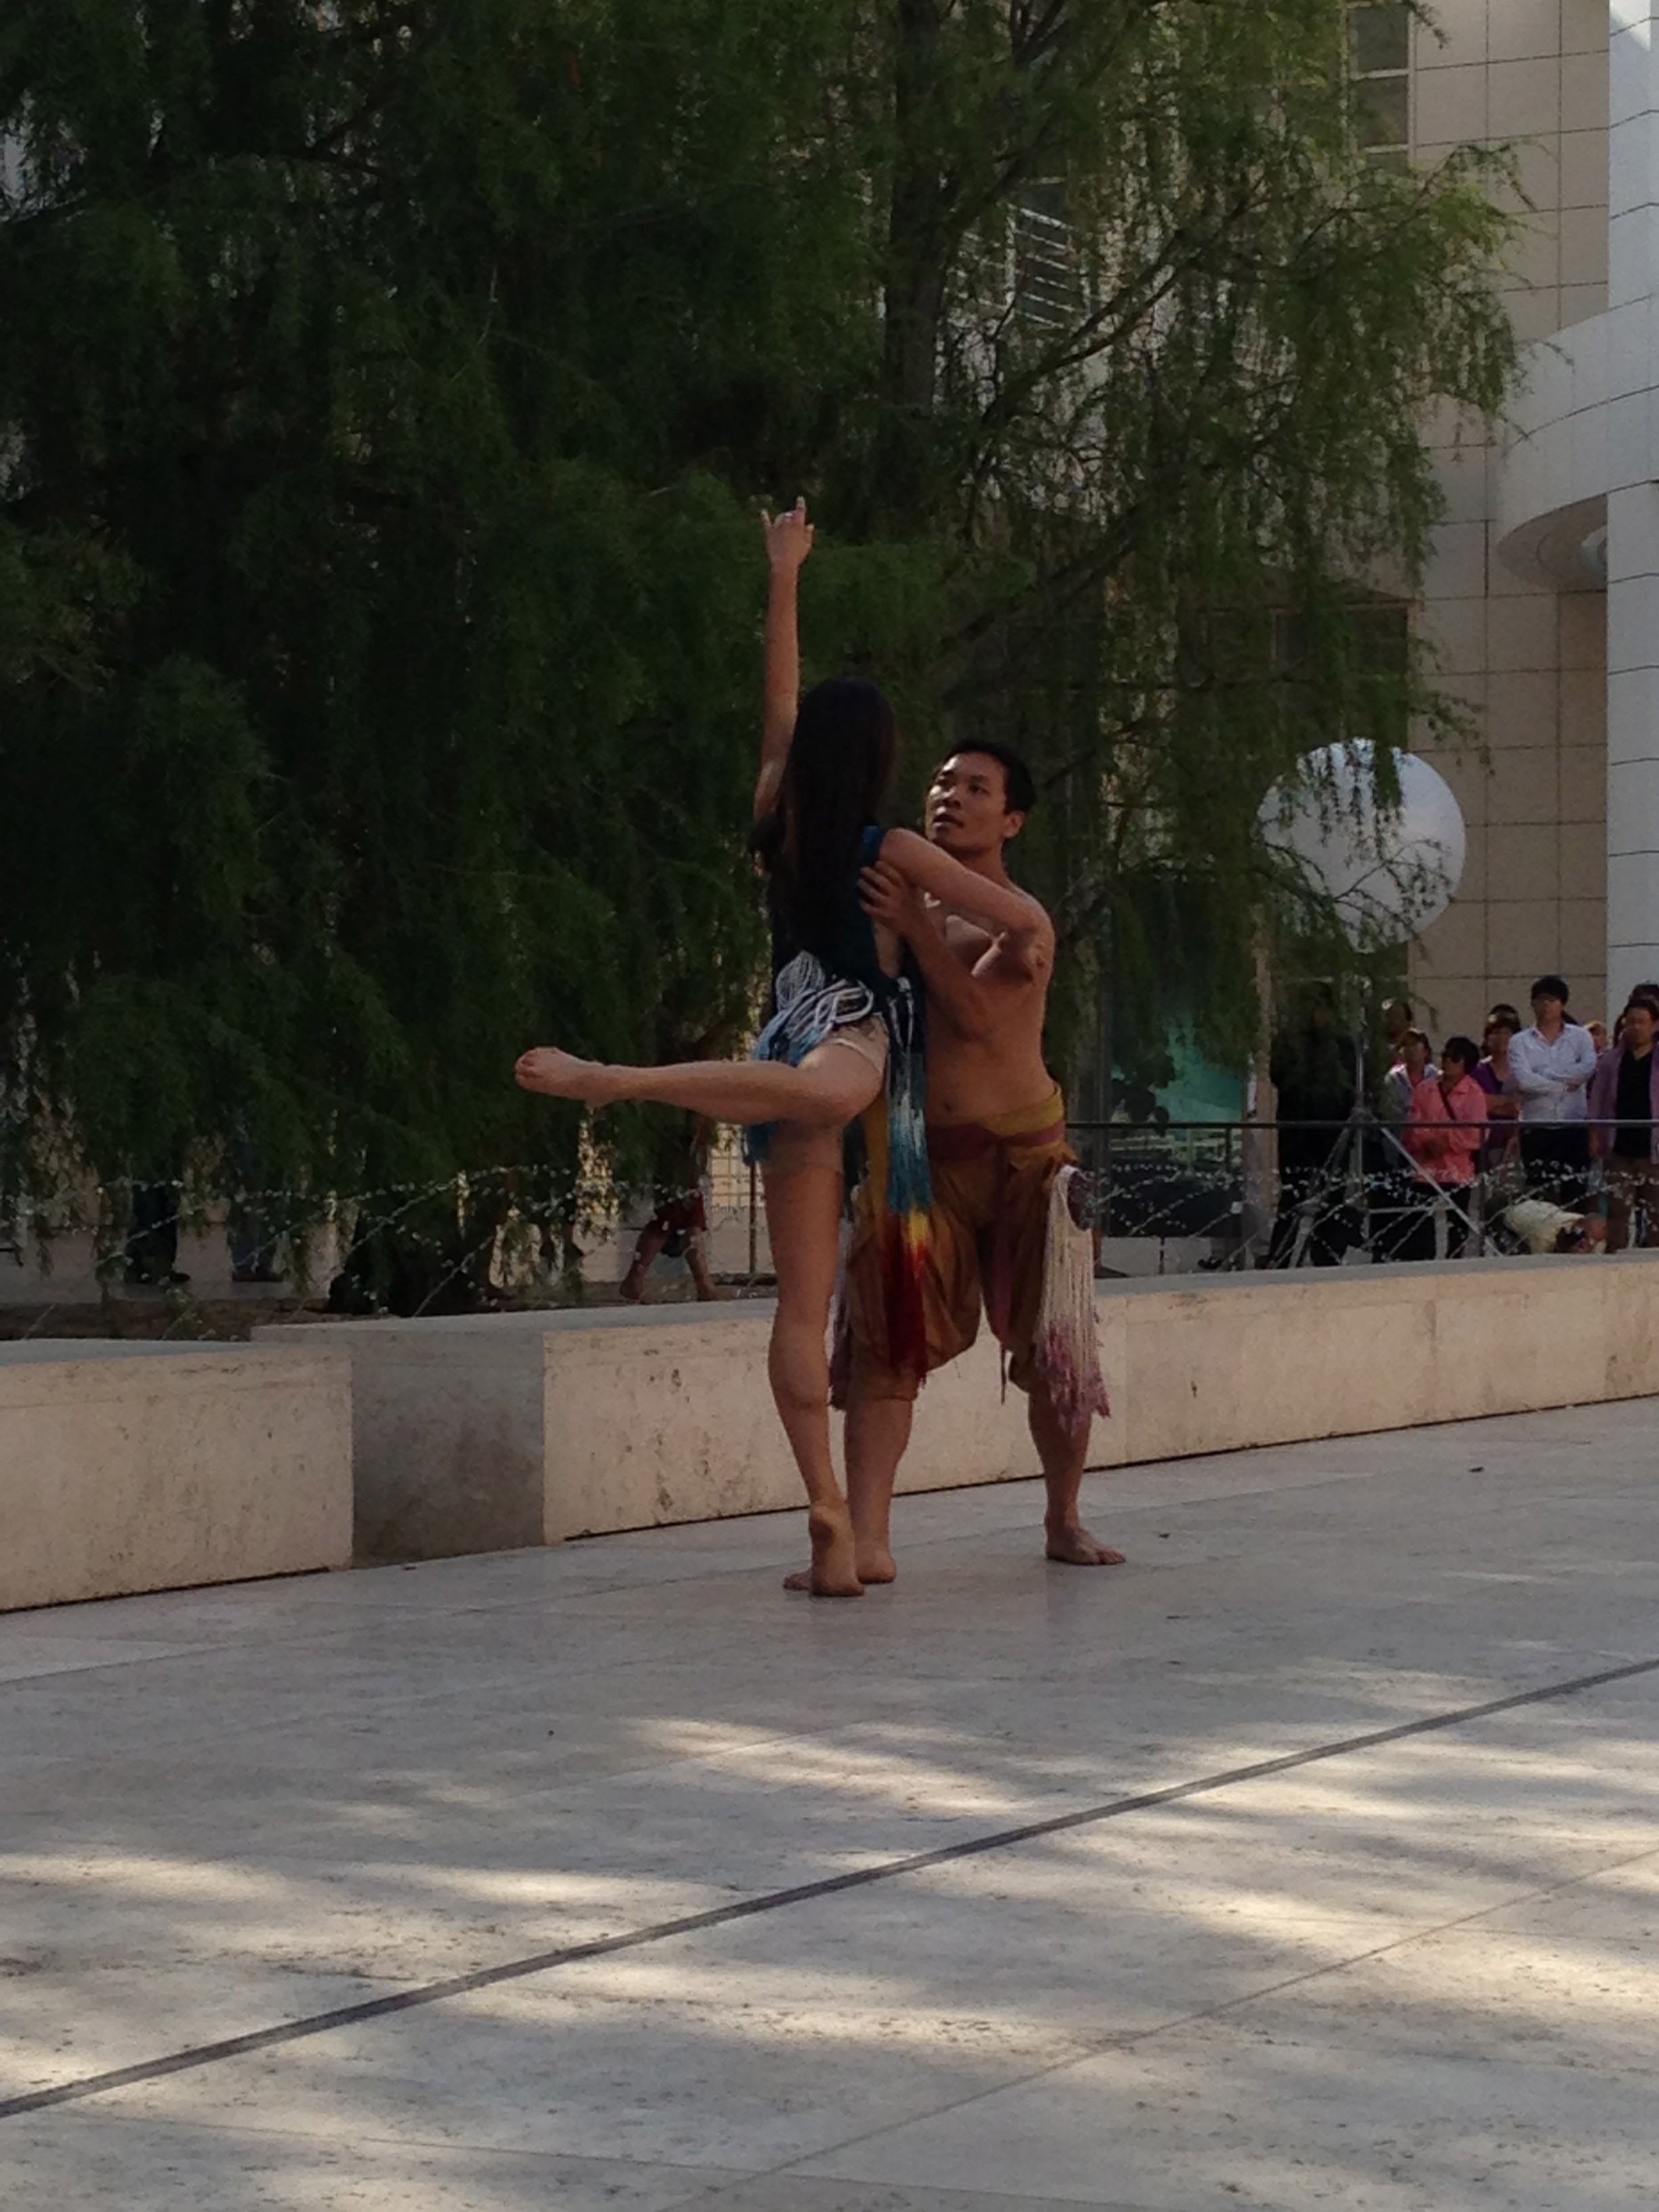 tiger lily - performed @ getty for dcw "get wet" series